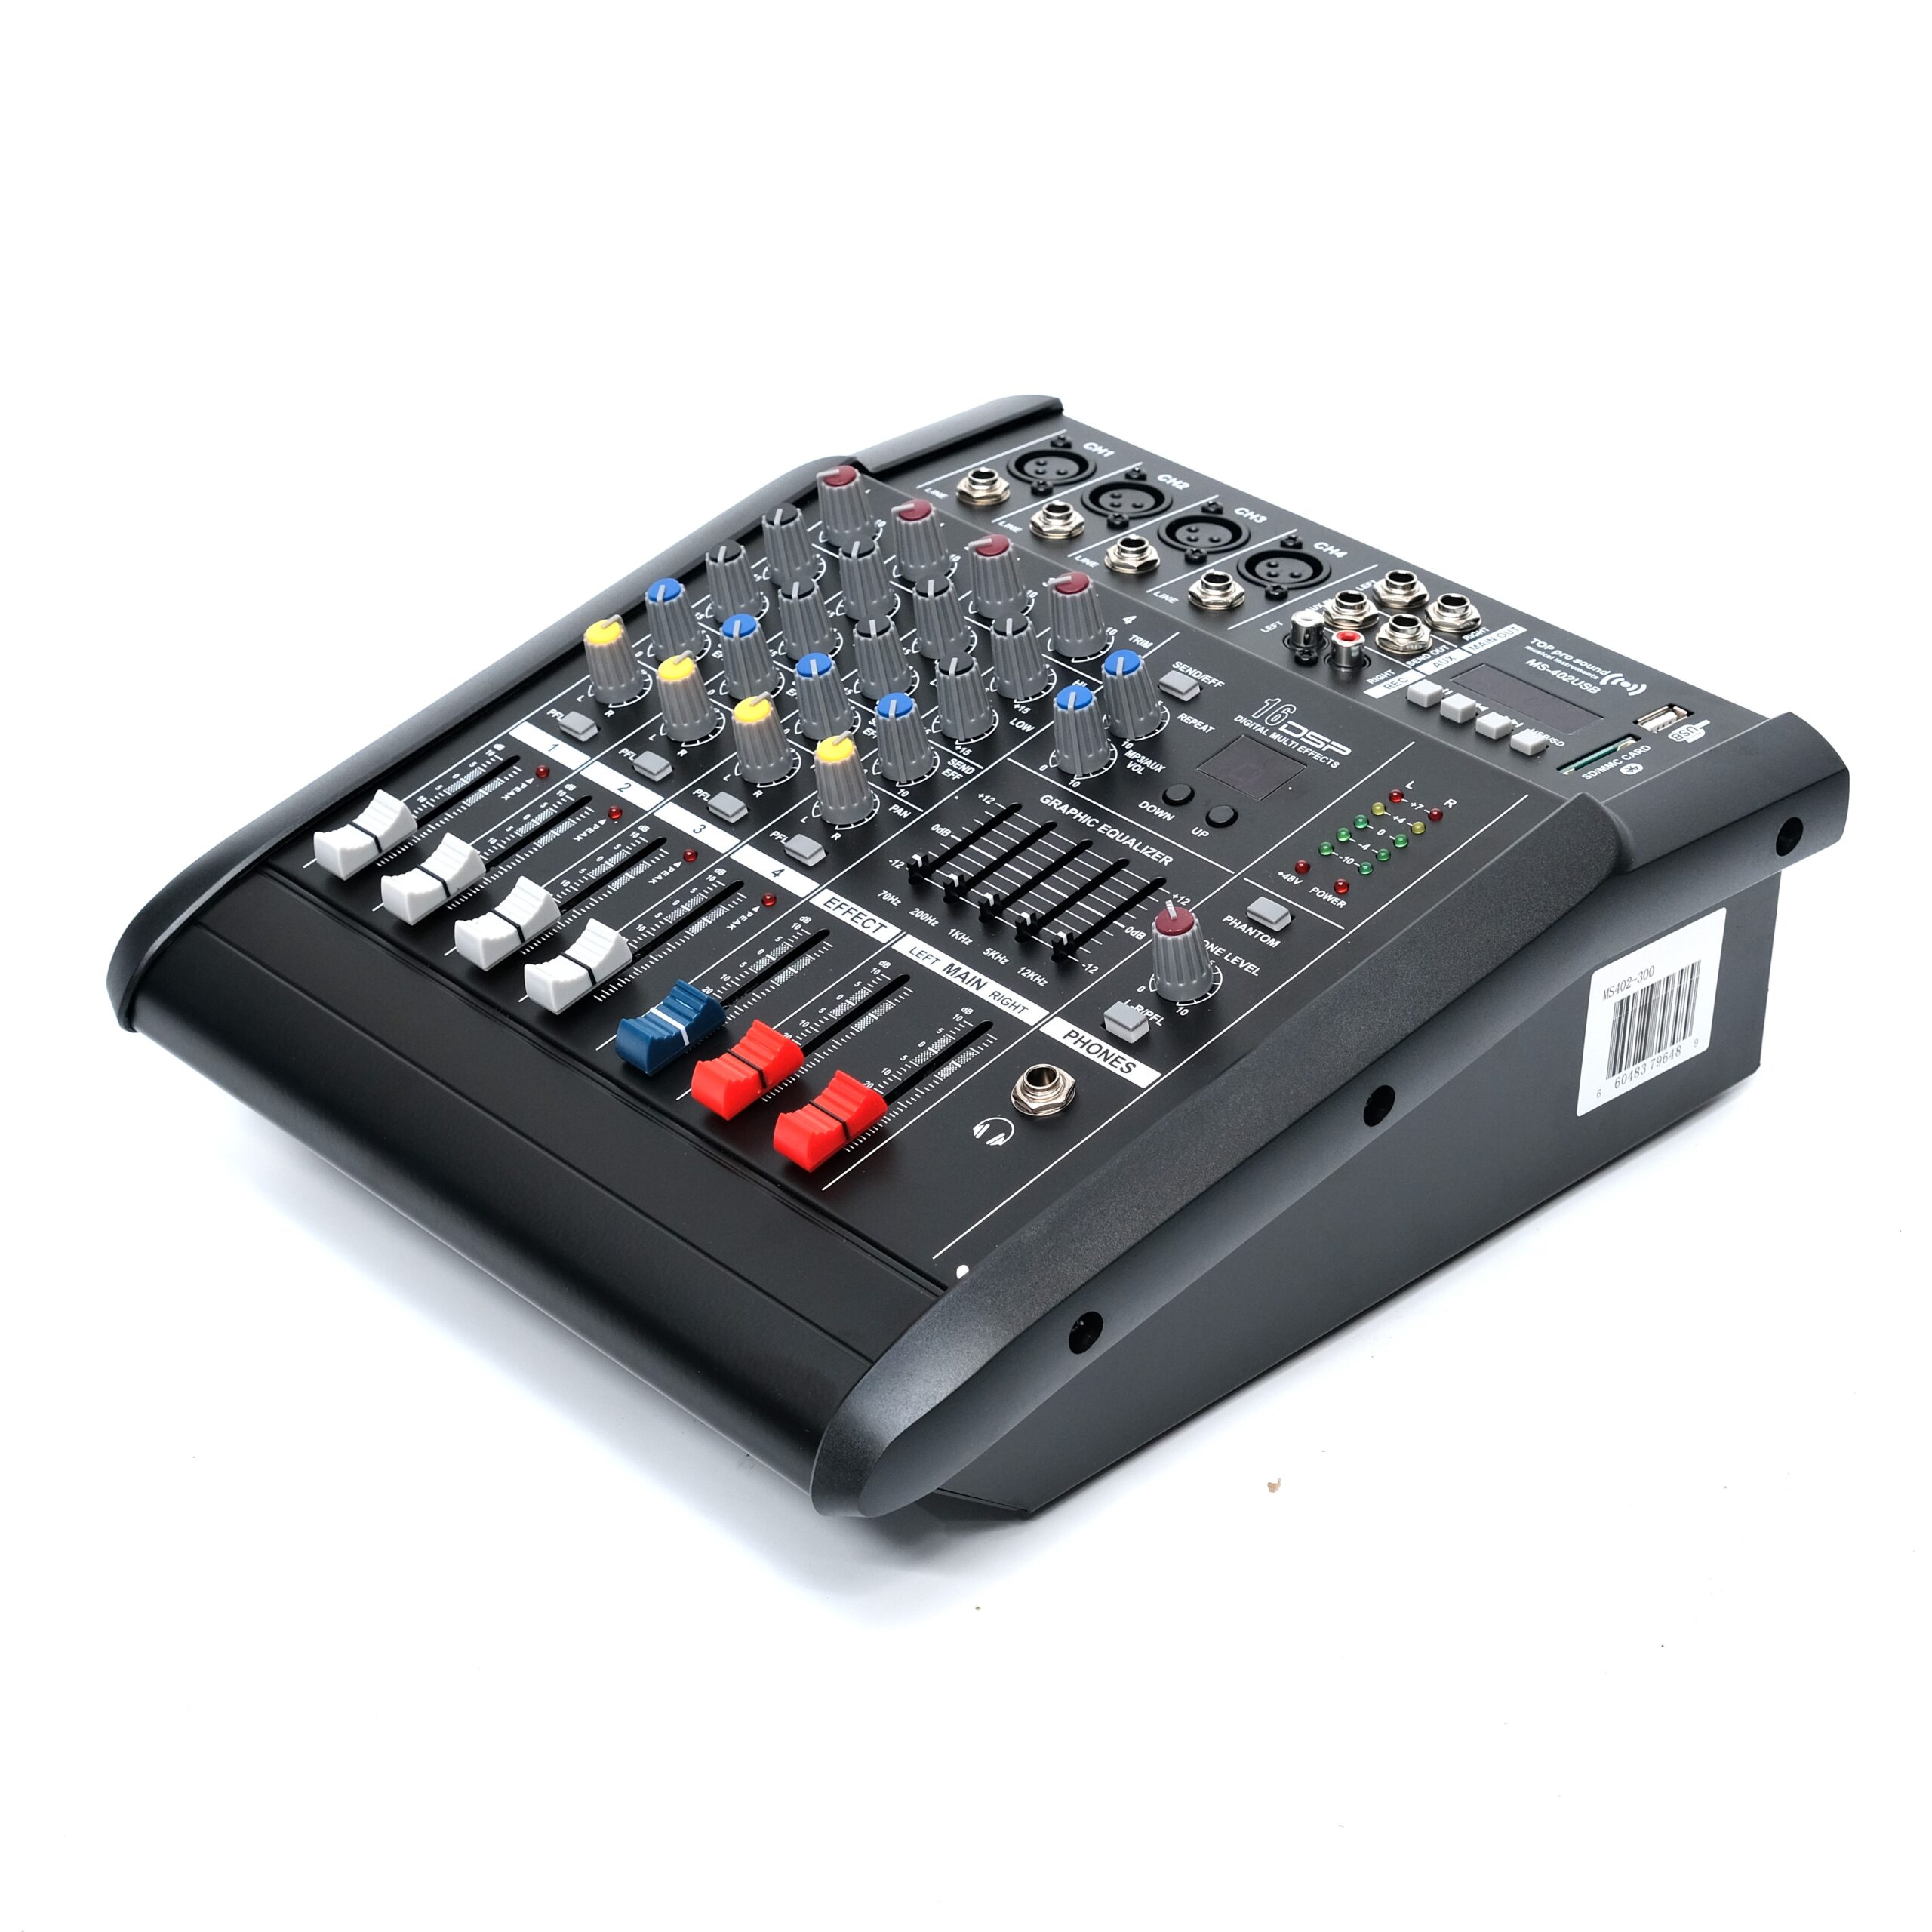 https://topprosound.com/wp-content/uploads/2023/04/TOP-PRO-MS-402USB-4-CHANNEL-DJ-POWER-MIXER-1-scaled.jpg